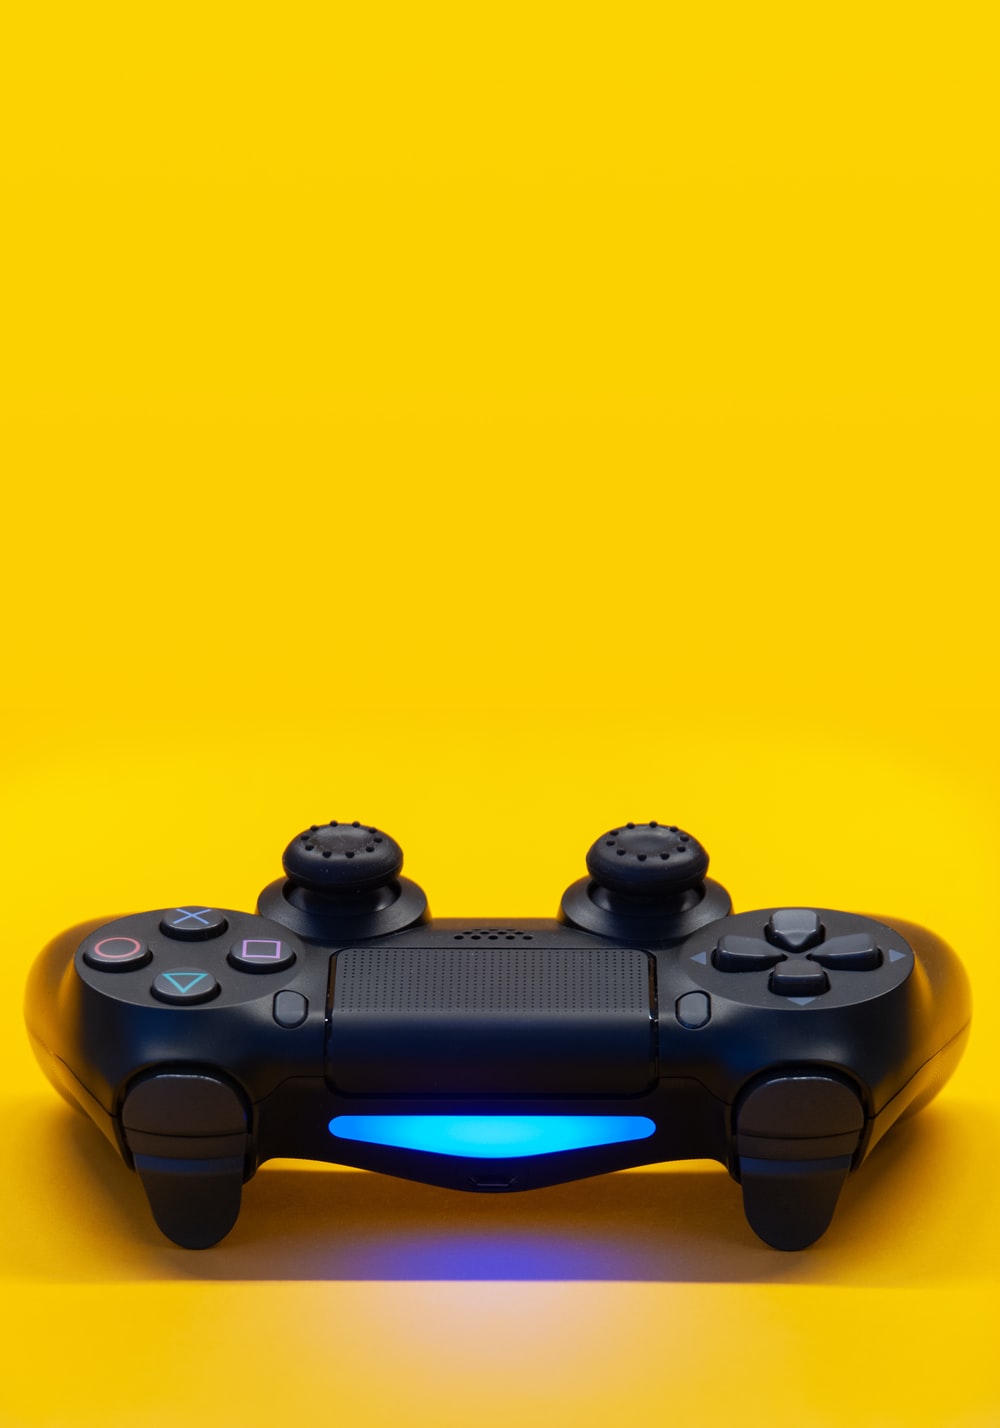 Gaming Picture [HQ]. Download Free Image